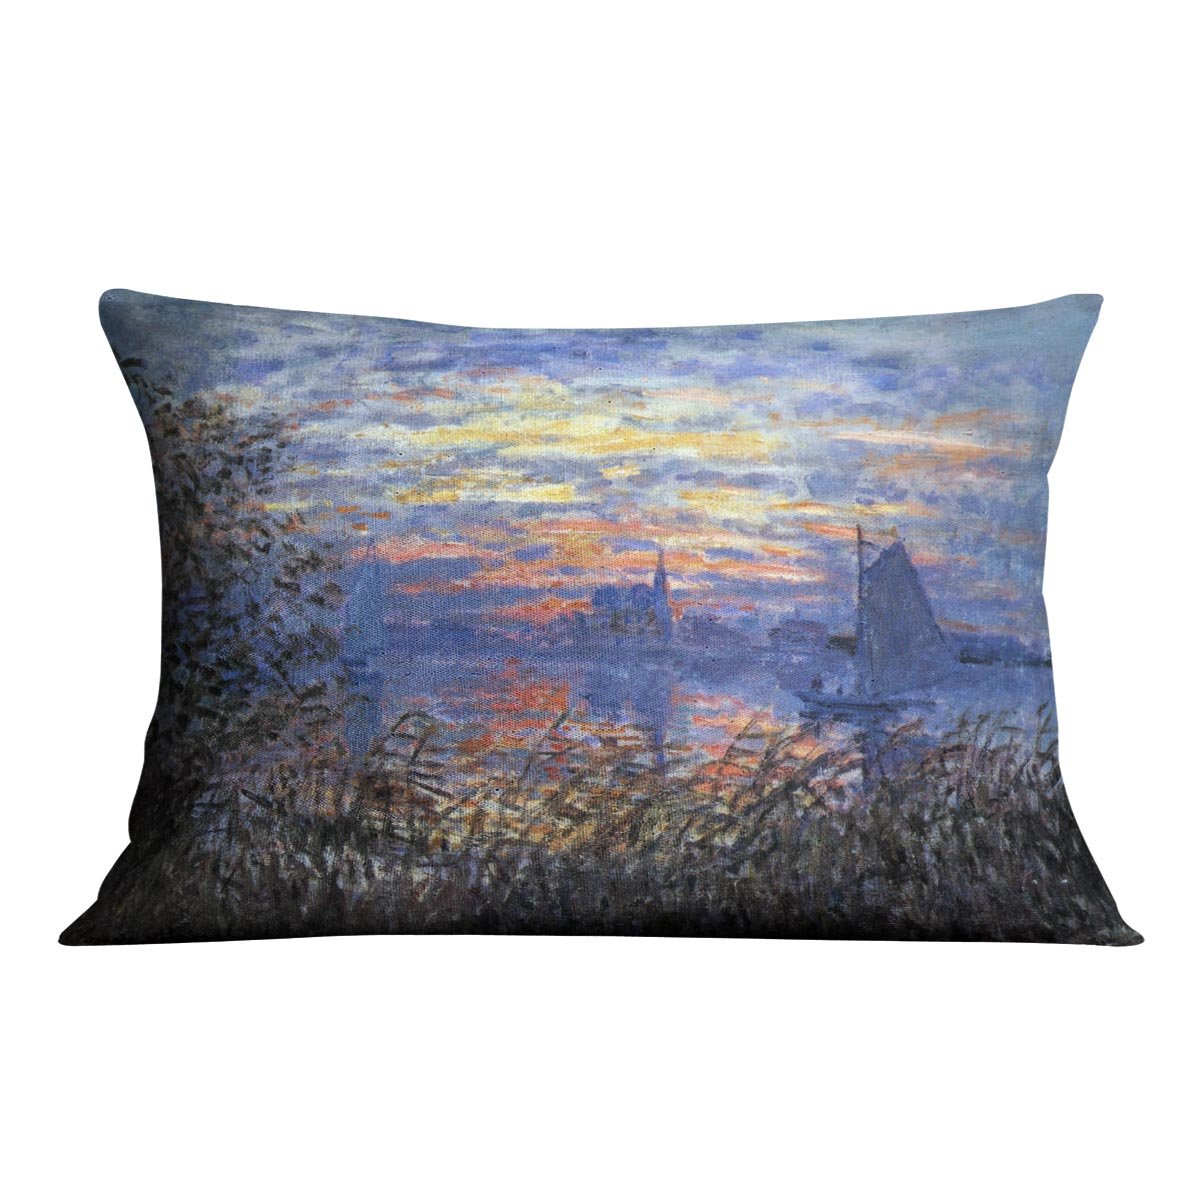 Sunset on the Seine by Monet Throw Pillow